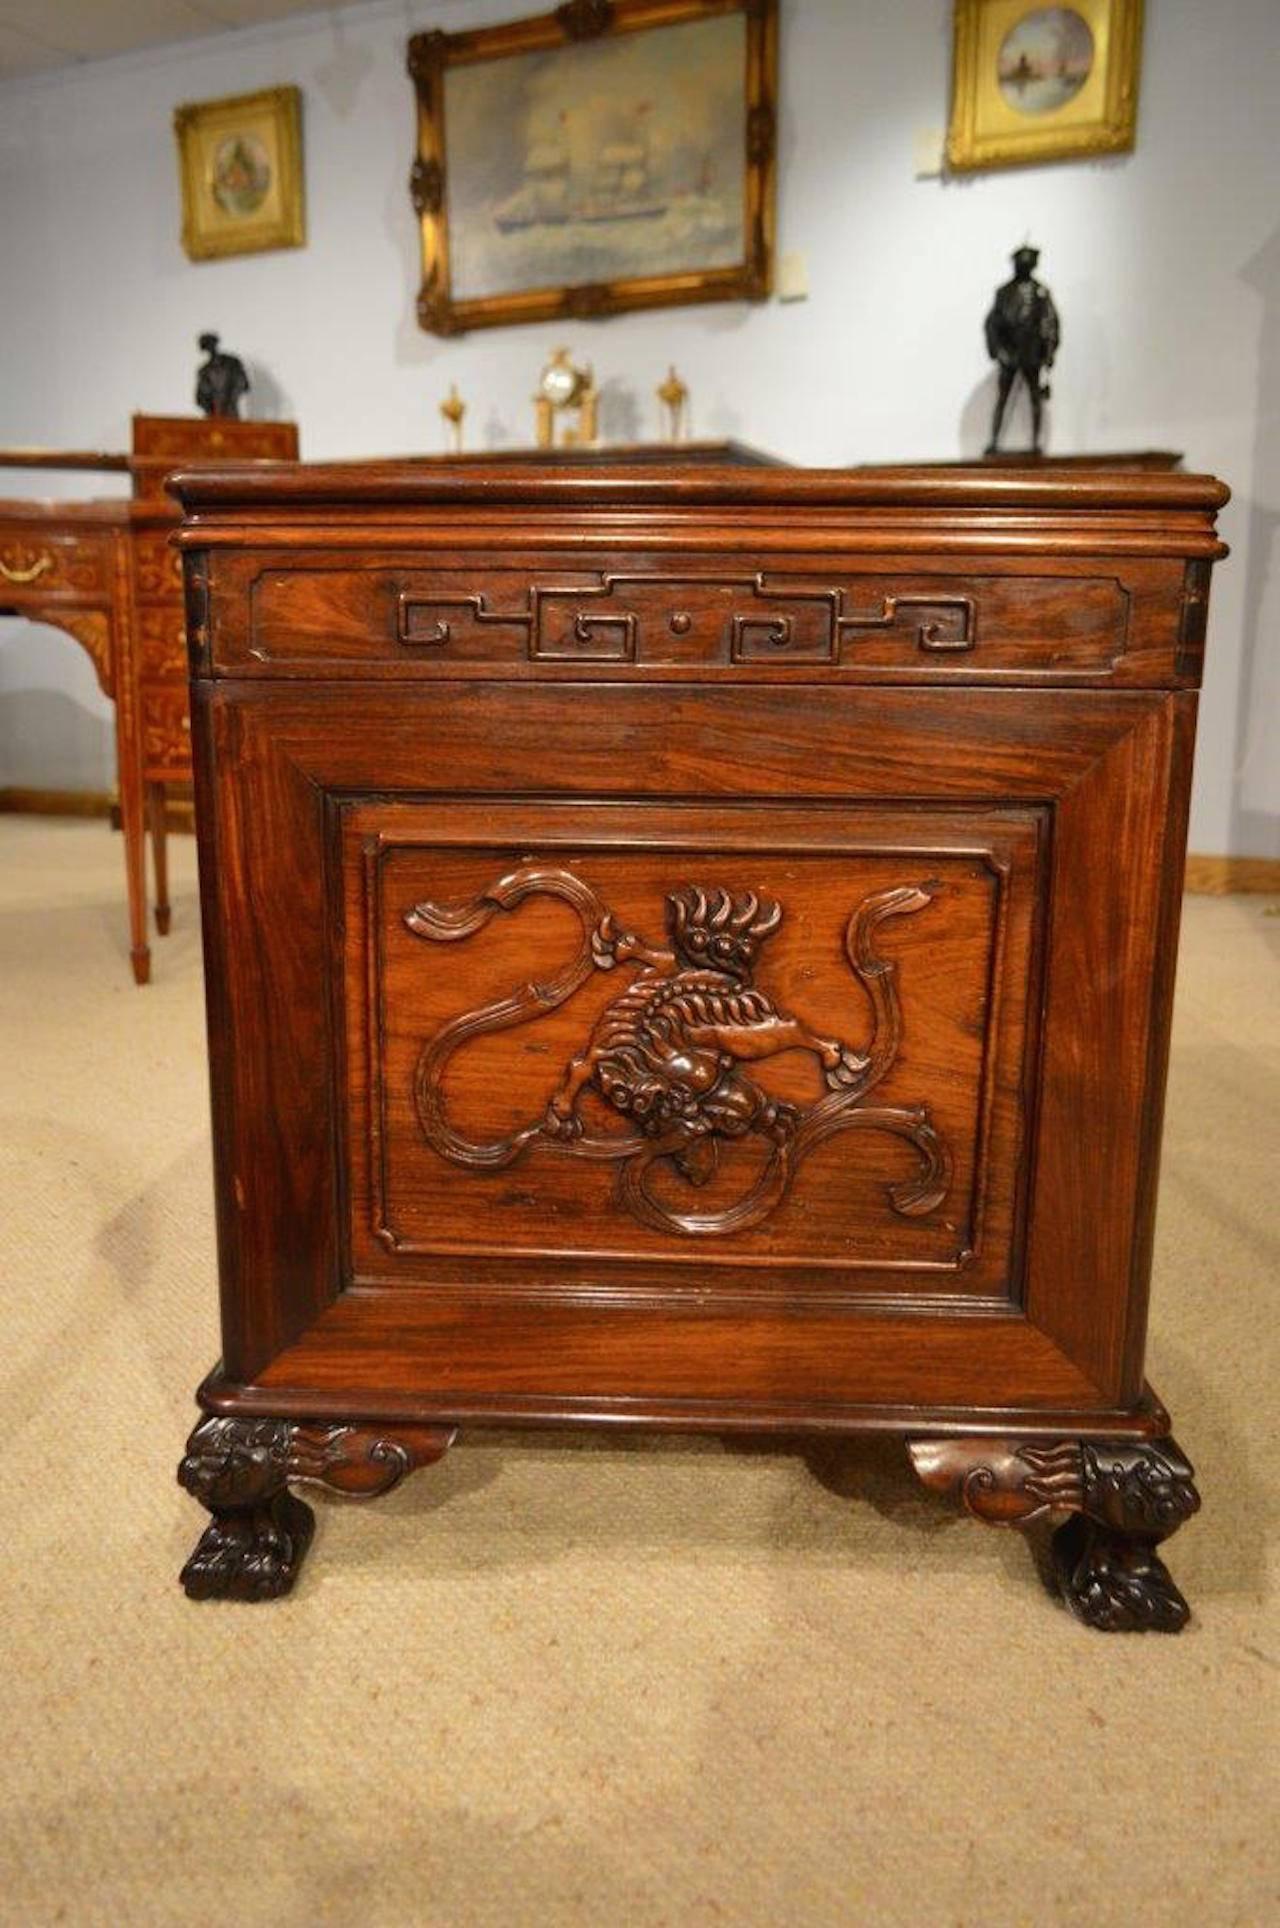 A hardwood Chinese carved camphor lined trunk. The hinged top having a wonderful rectangular carved panel depicting dragons at play within a typical Oriental carved border, opening to reveal a camphor lined interior. Having carved paneled ends, back